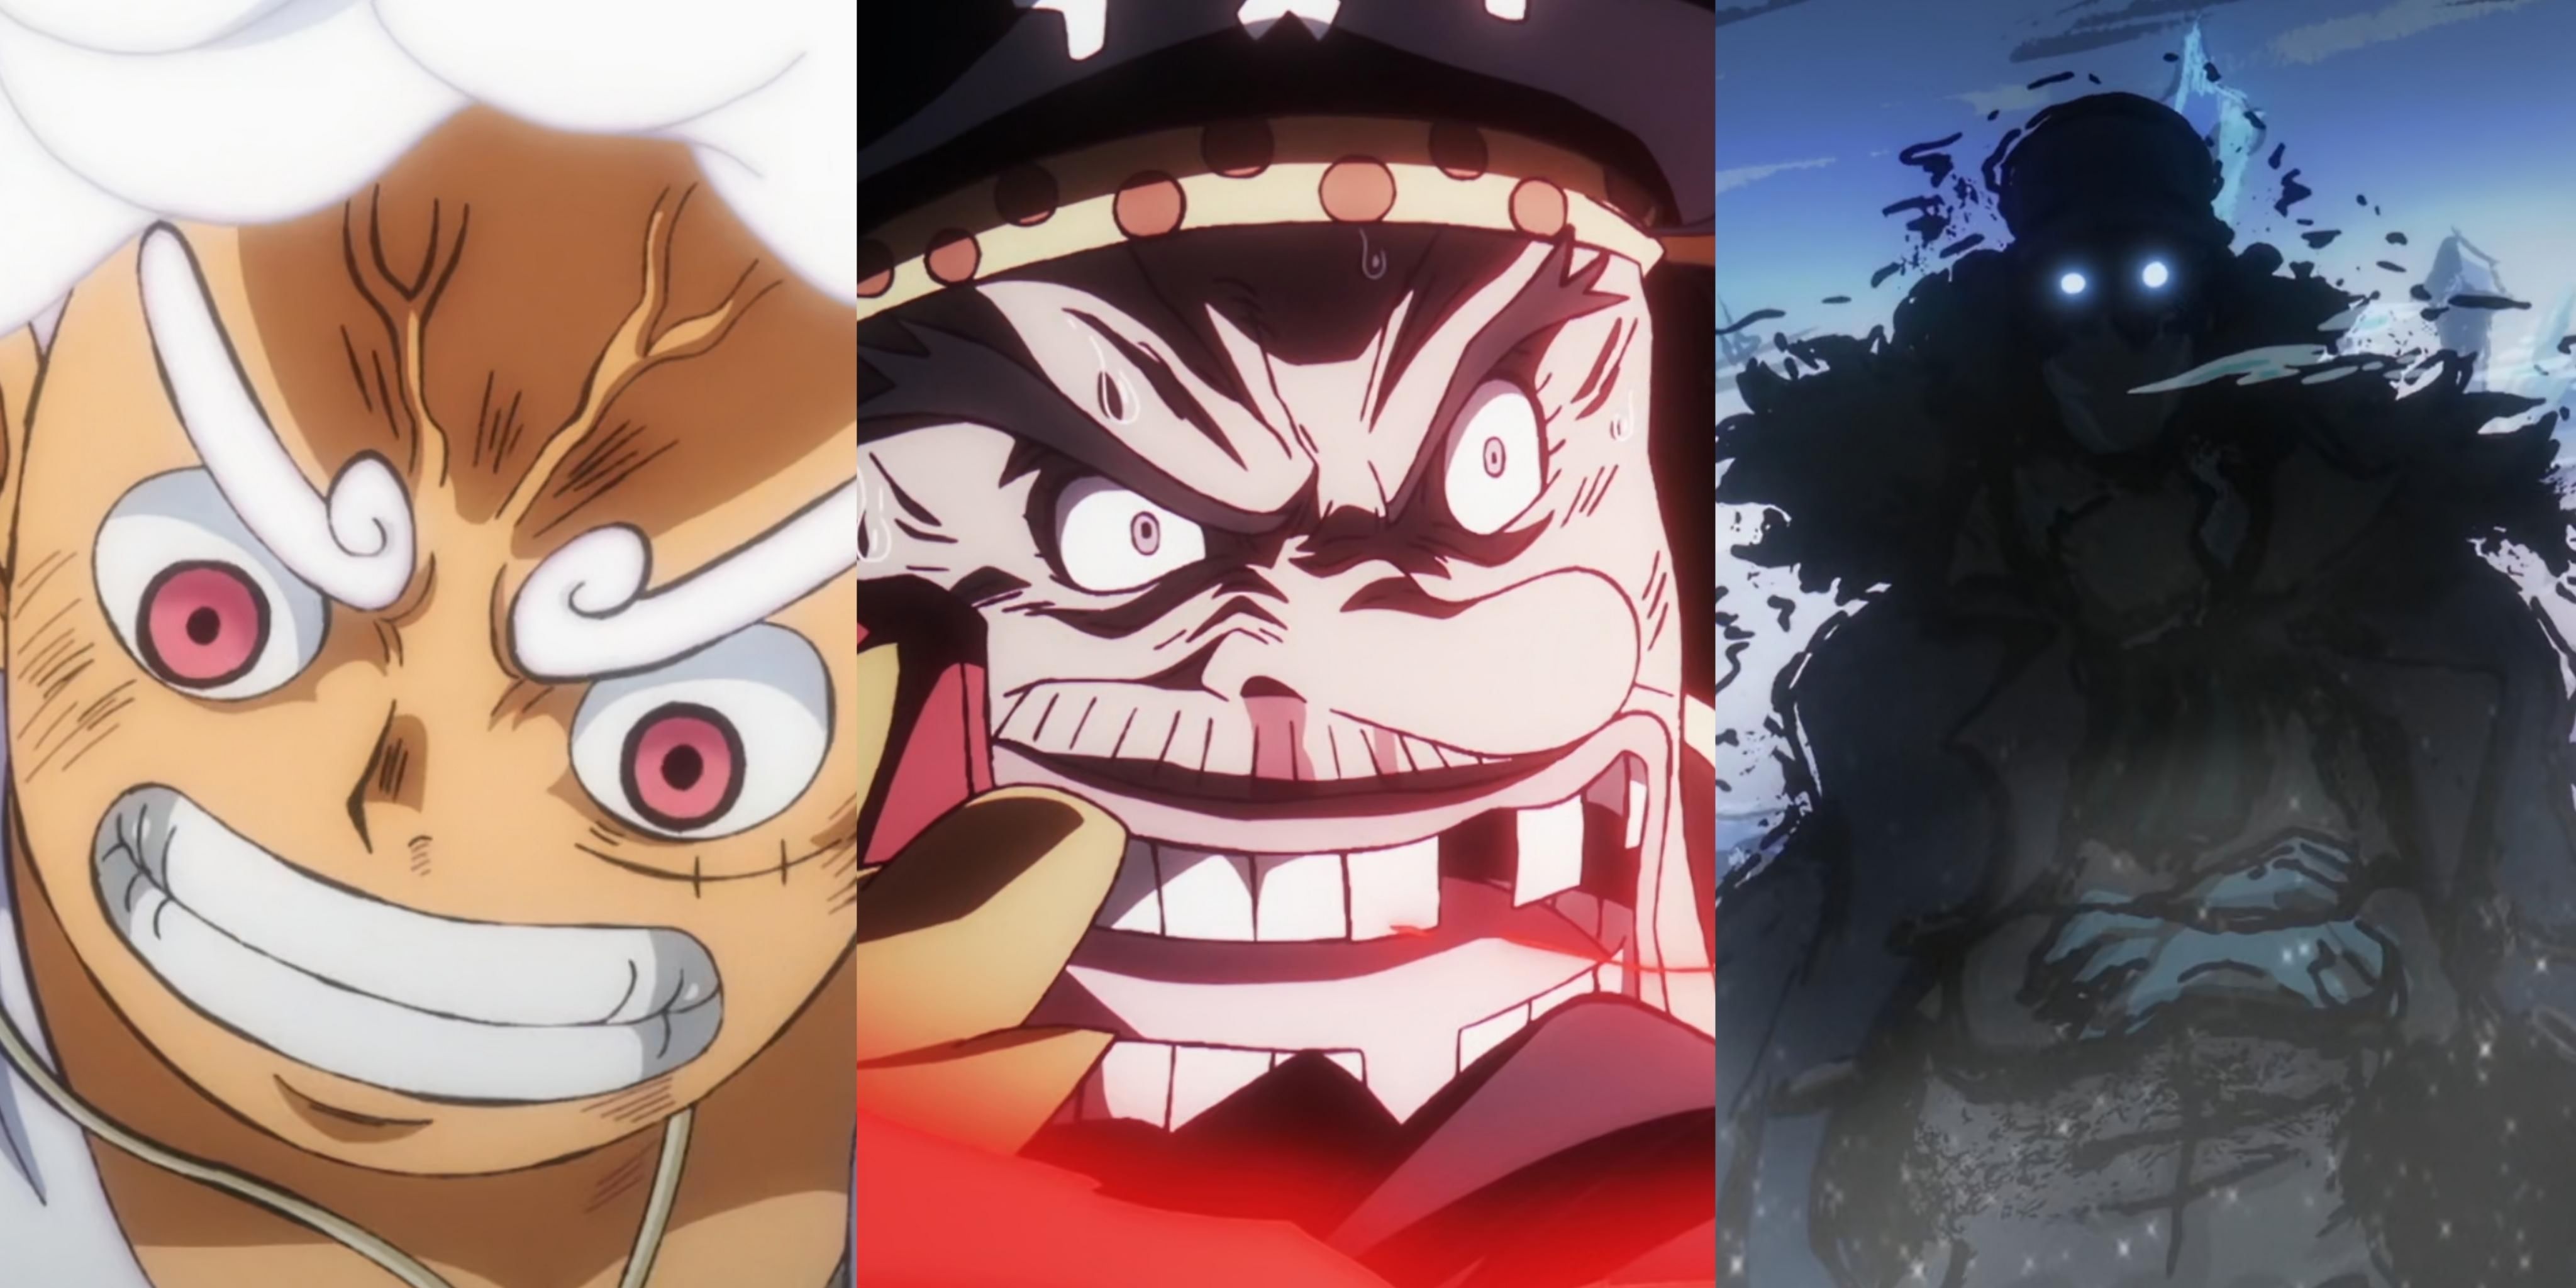 Featured One Piece Characters Blackbeard Needs To Beat To Become Pirate King Luffy Kuzan